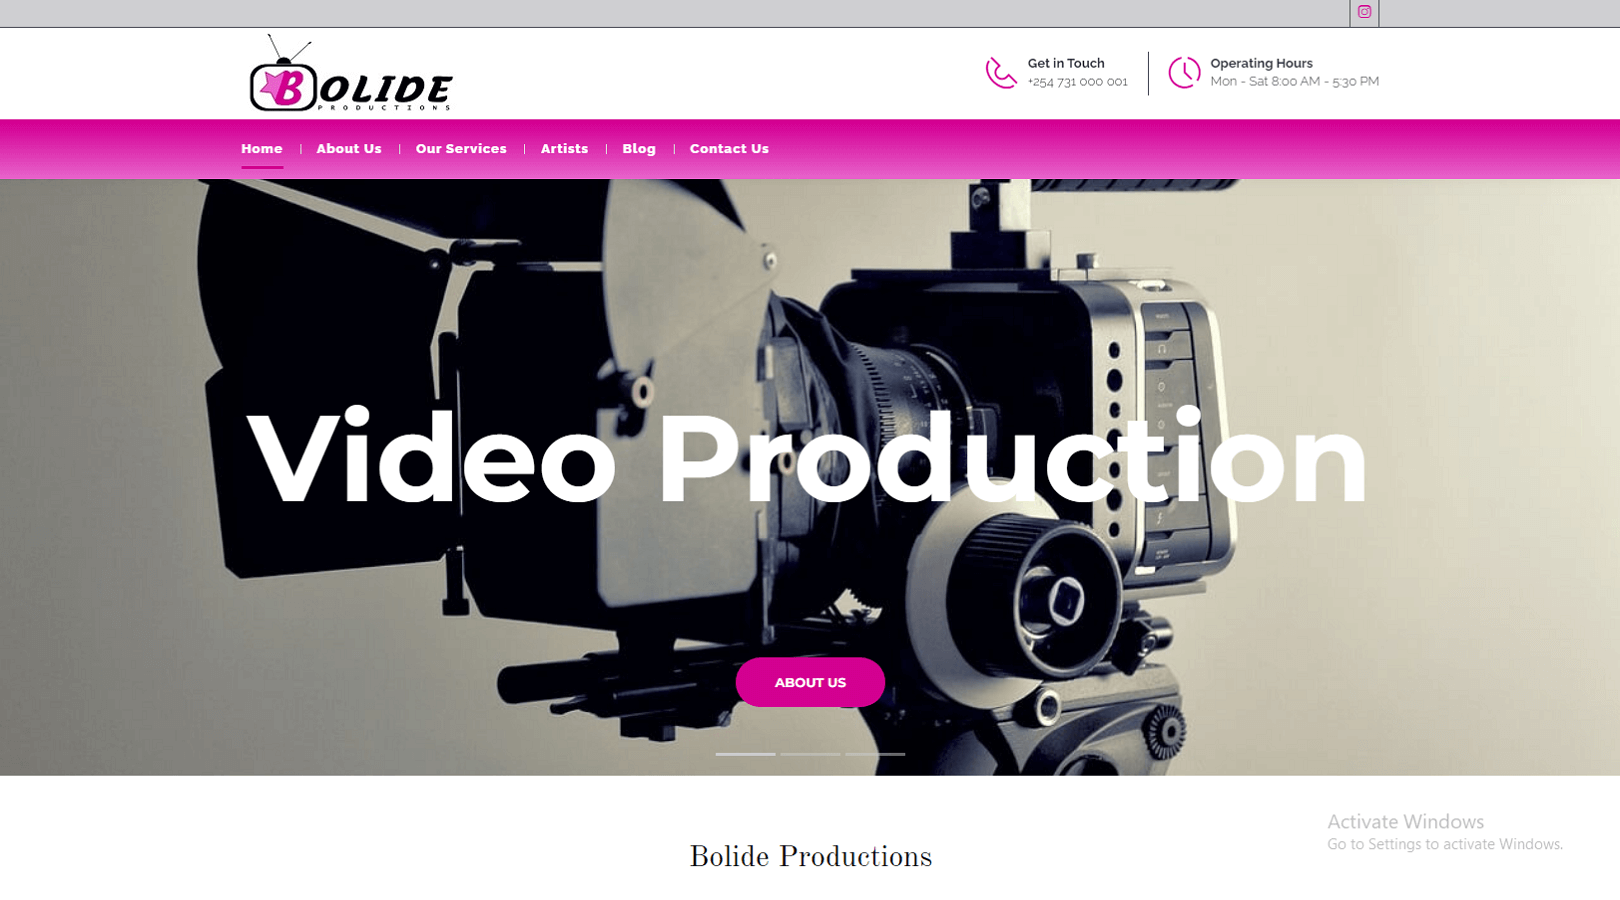 Bolide Productions